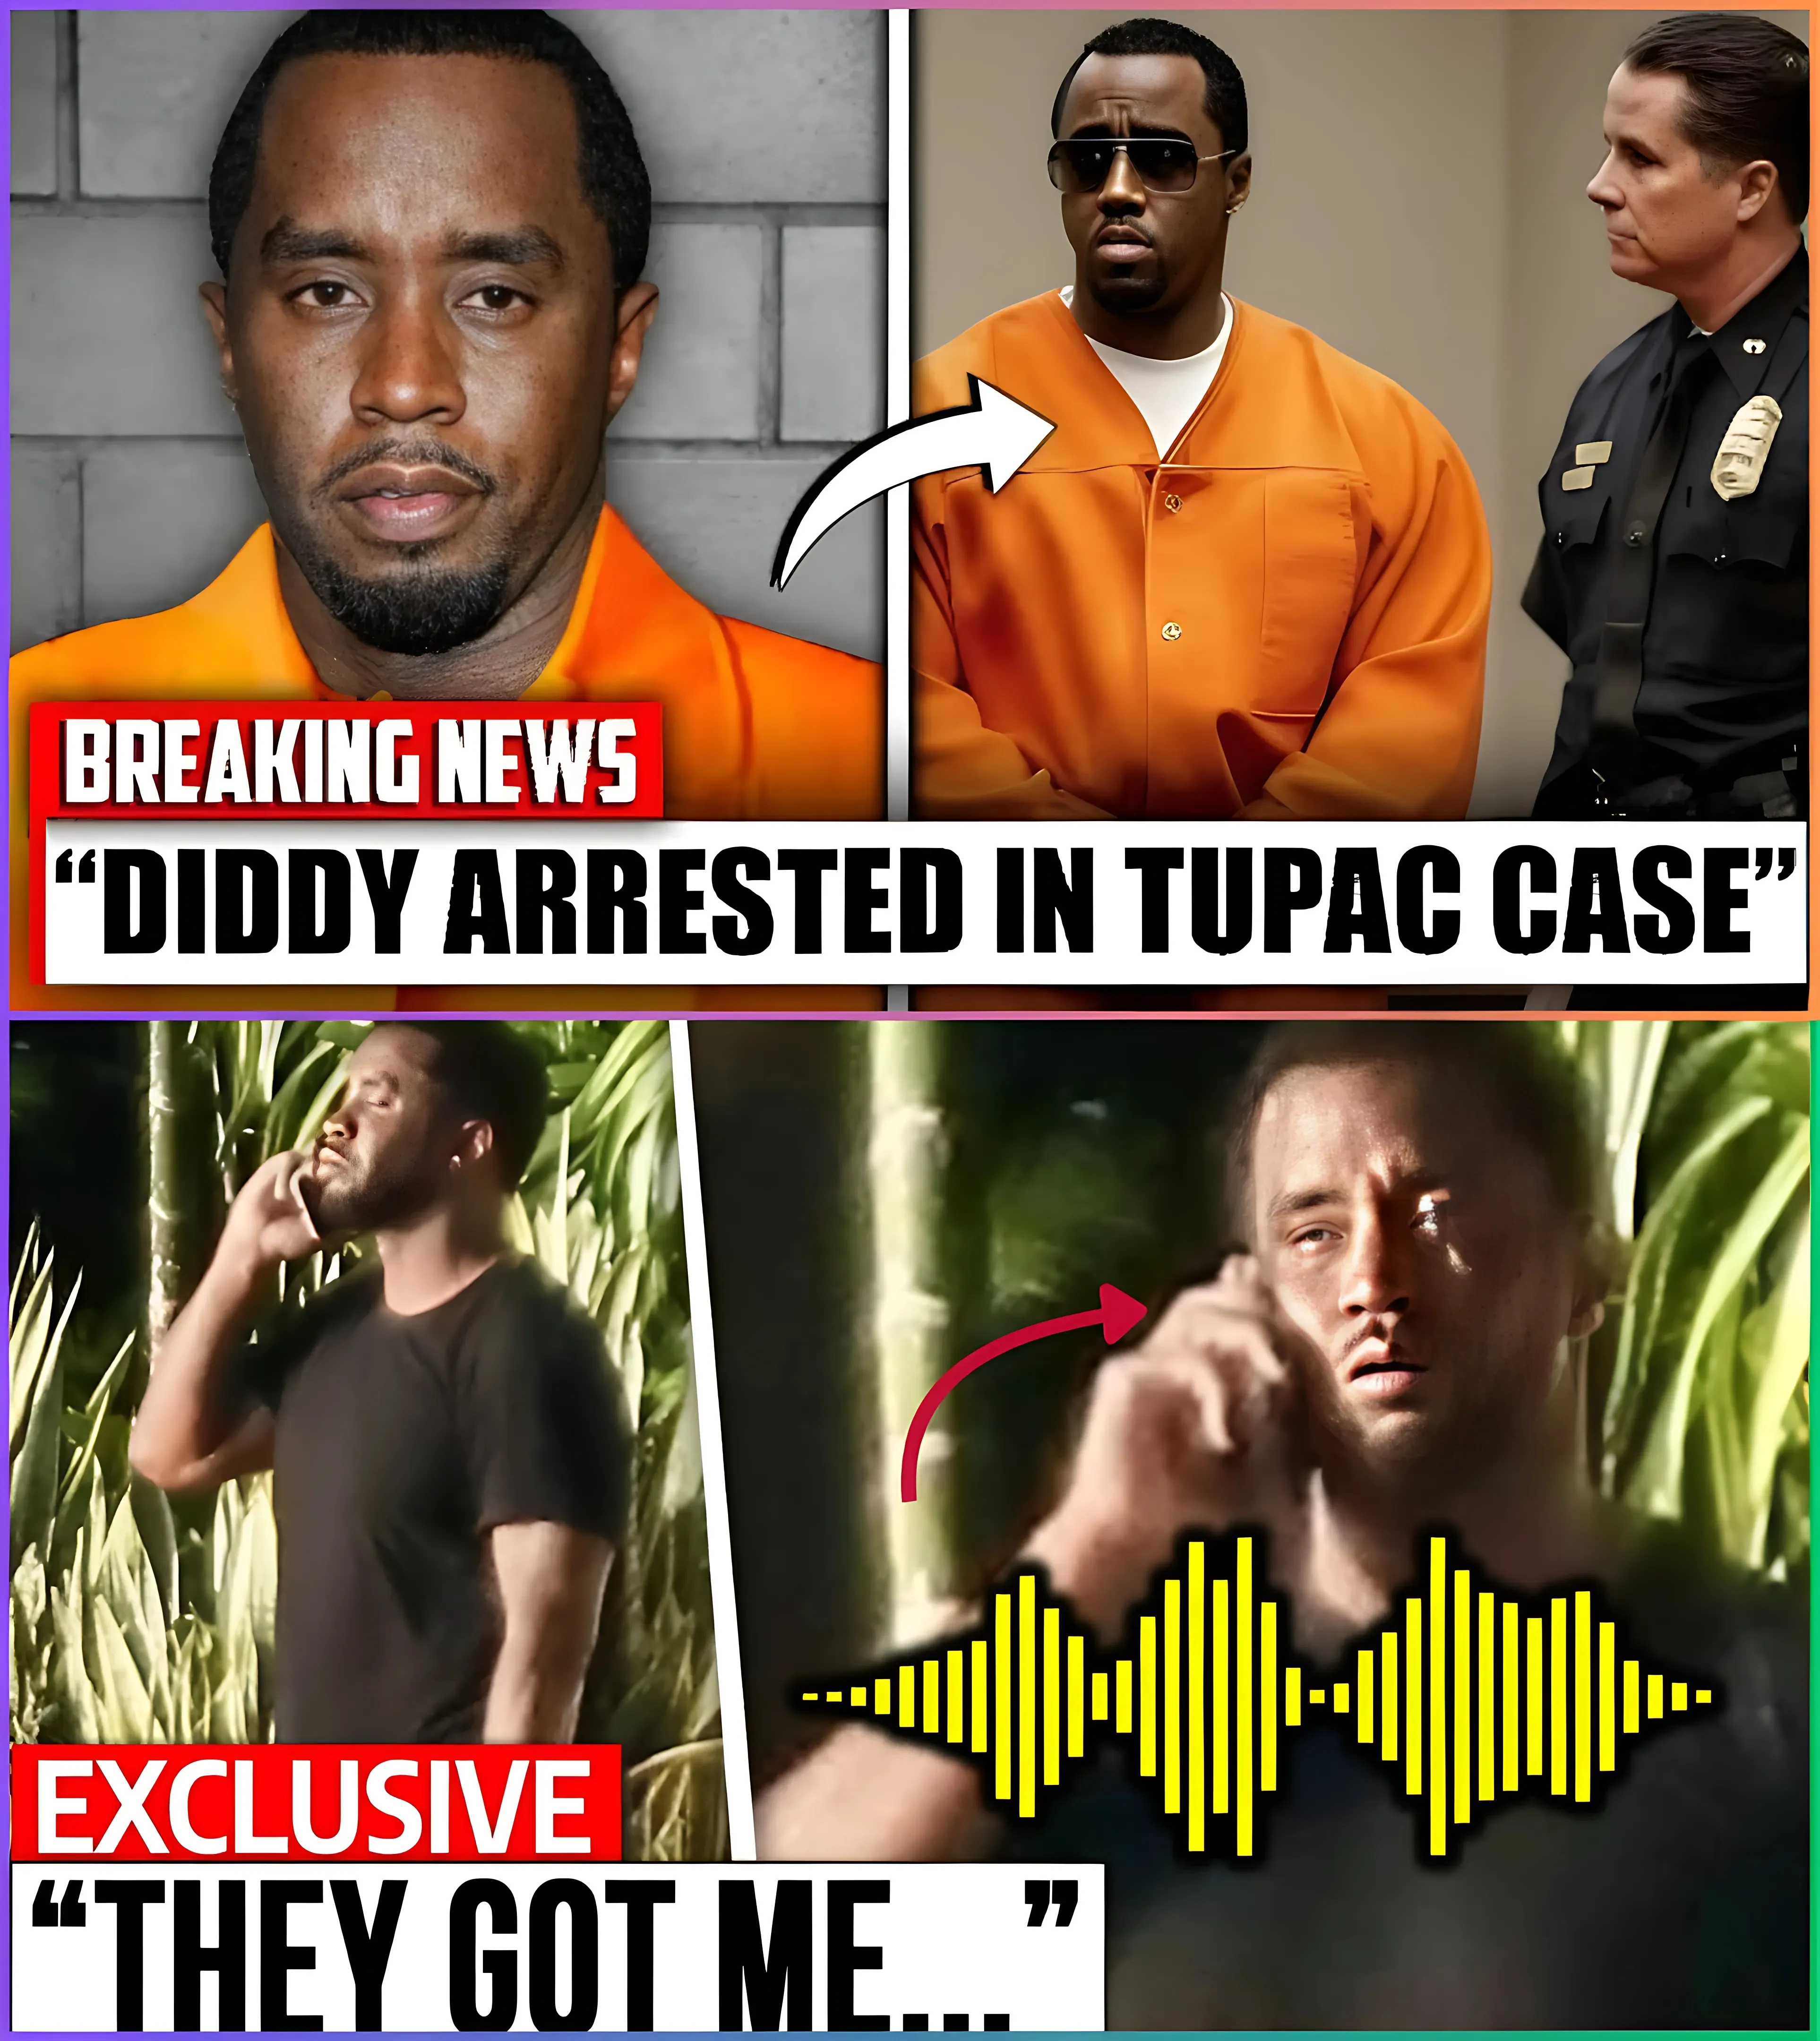 Accidentally DISCOVERED UNSURPRISE midnight call Recording proves that P Diddy is GUILTY and needs to be investigated!!